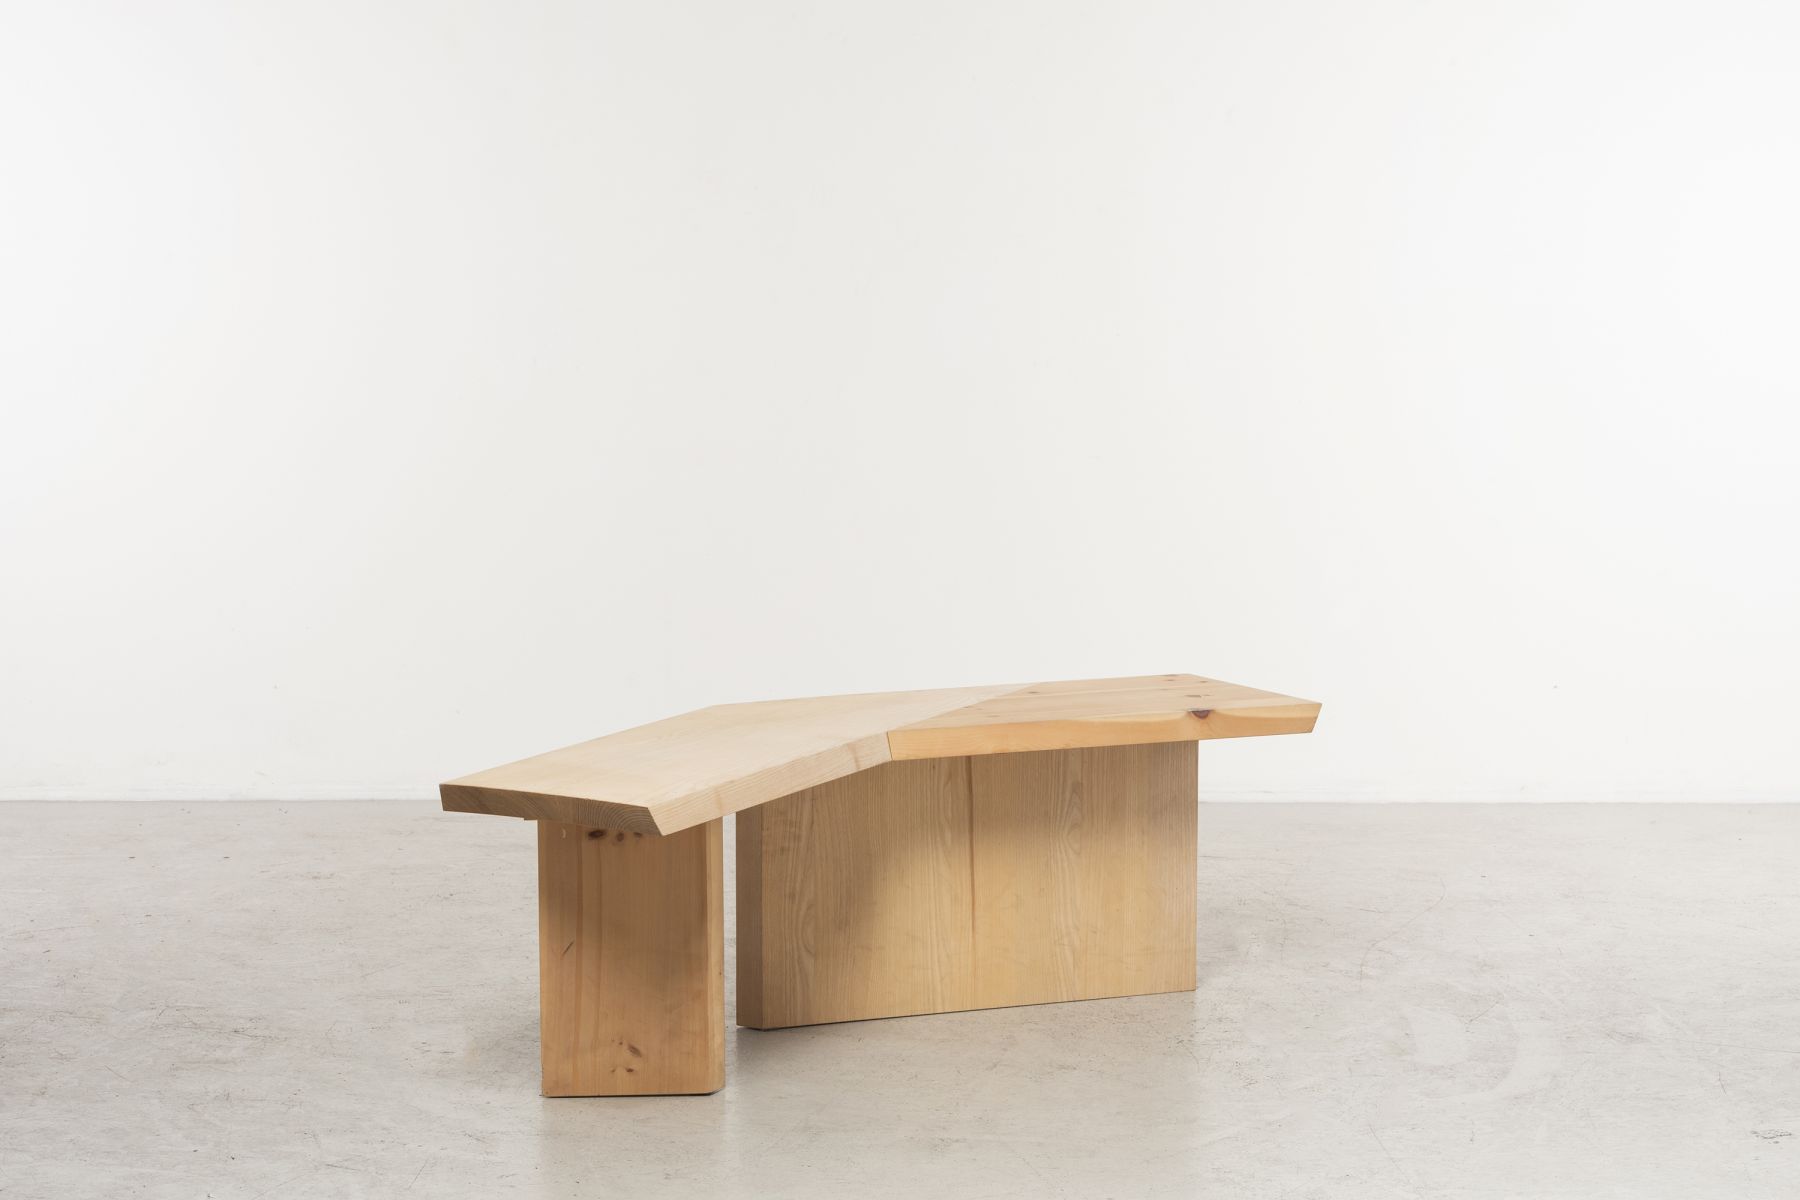 Triennale collection low table Martino Gamper pic-1